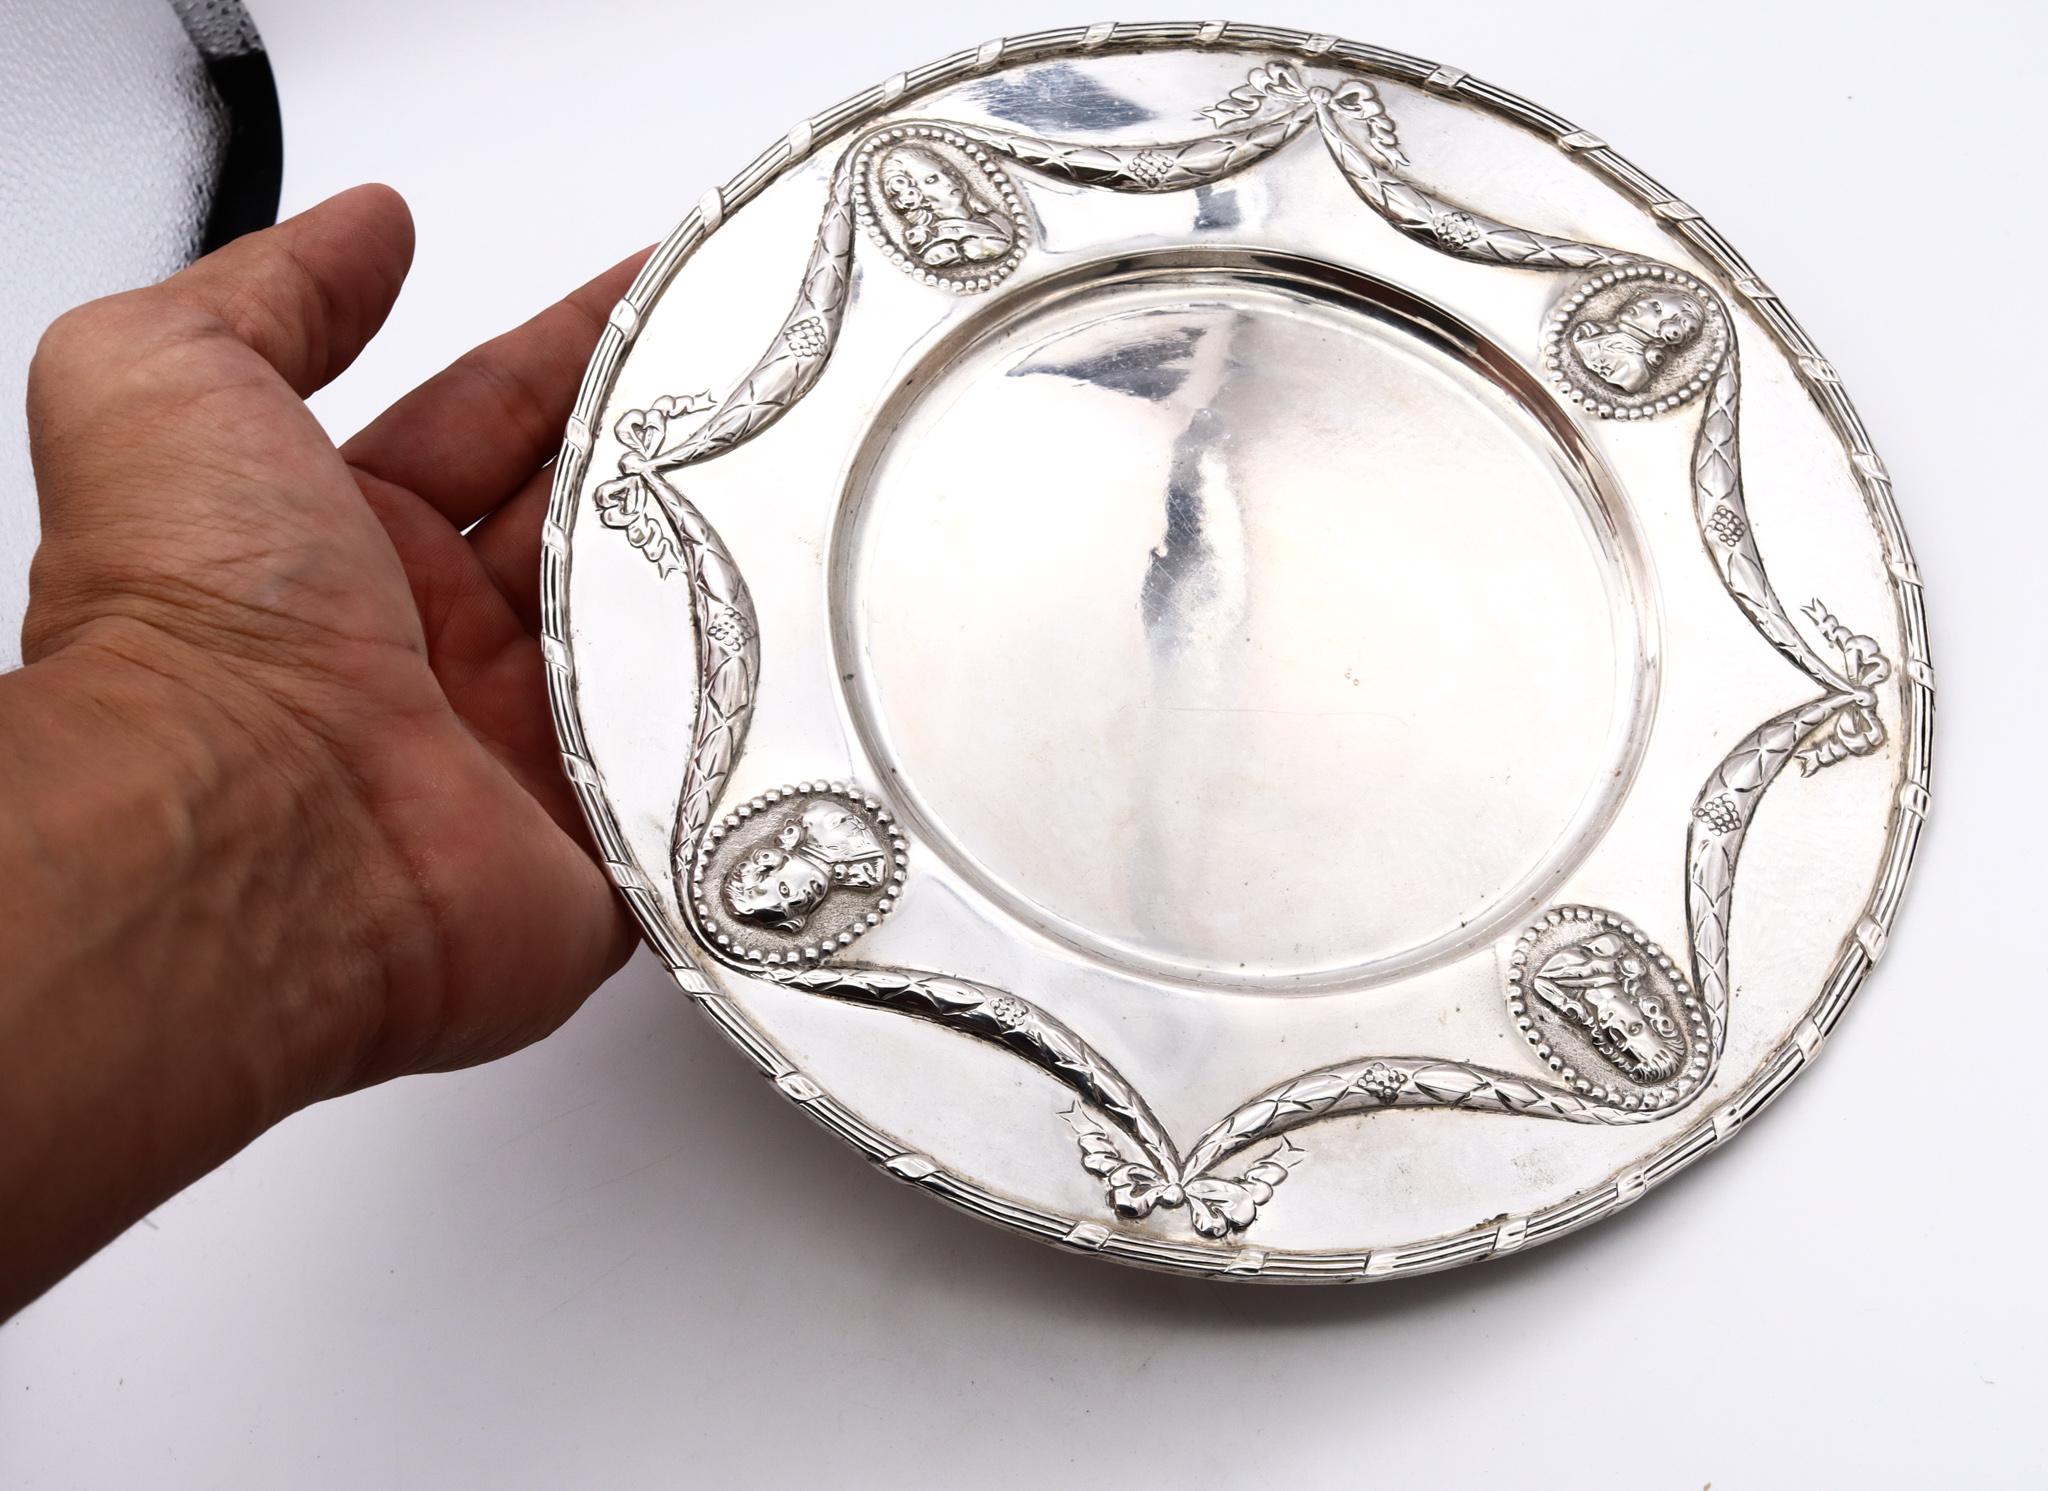 Hand-Crafted Germany Hanau 1820 Neoclassical Decorative Dish Plate in Solid Sterling Silver For Sale